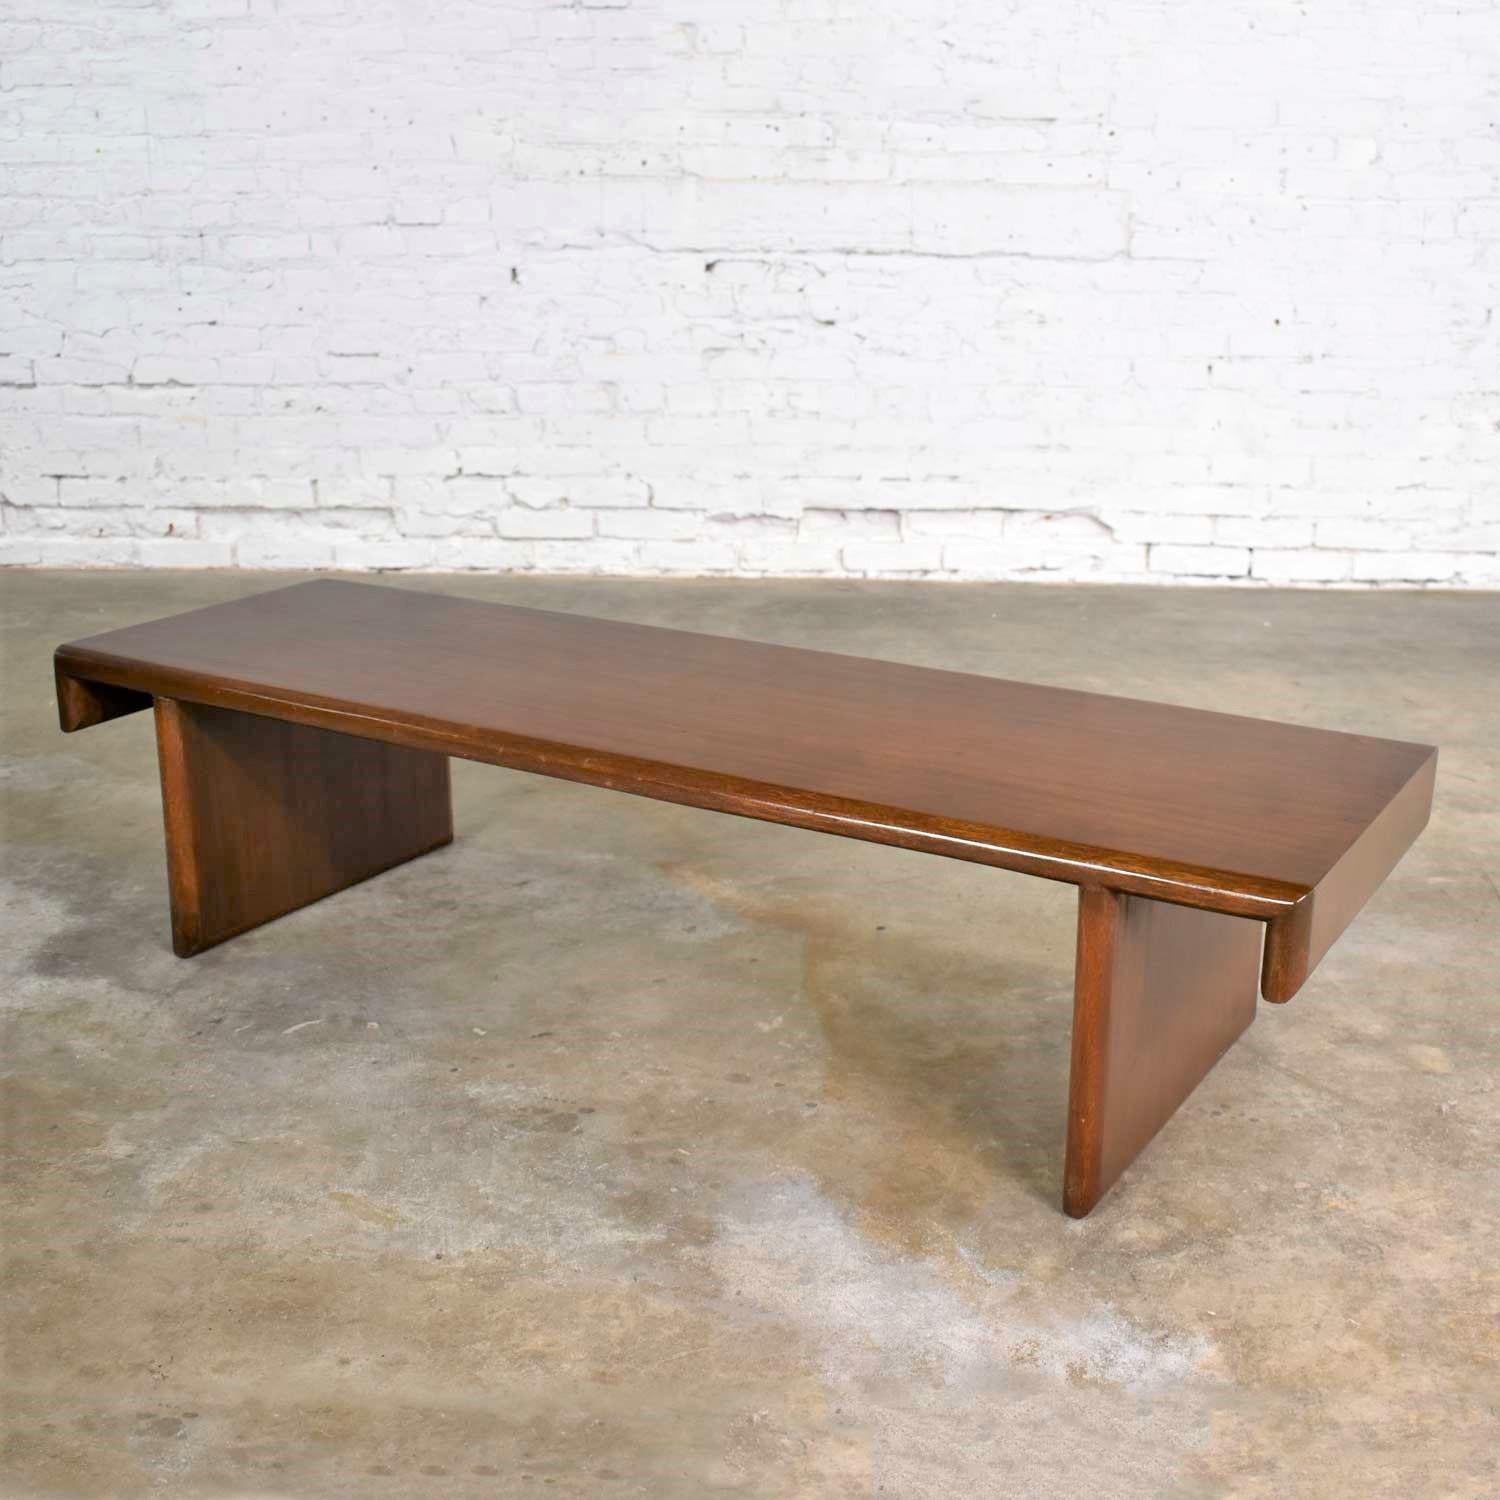 American Vintage Walnut Stained Bench Coffee Table Style of Frank Lloyd Wright for Henred